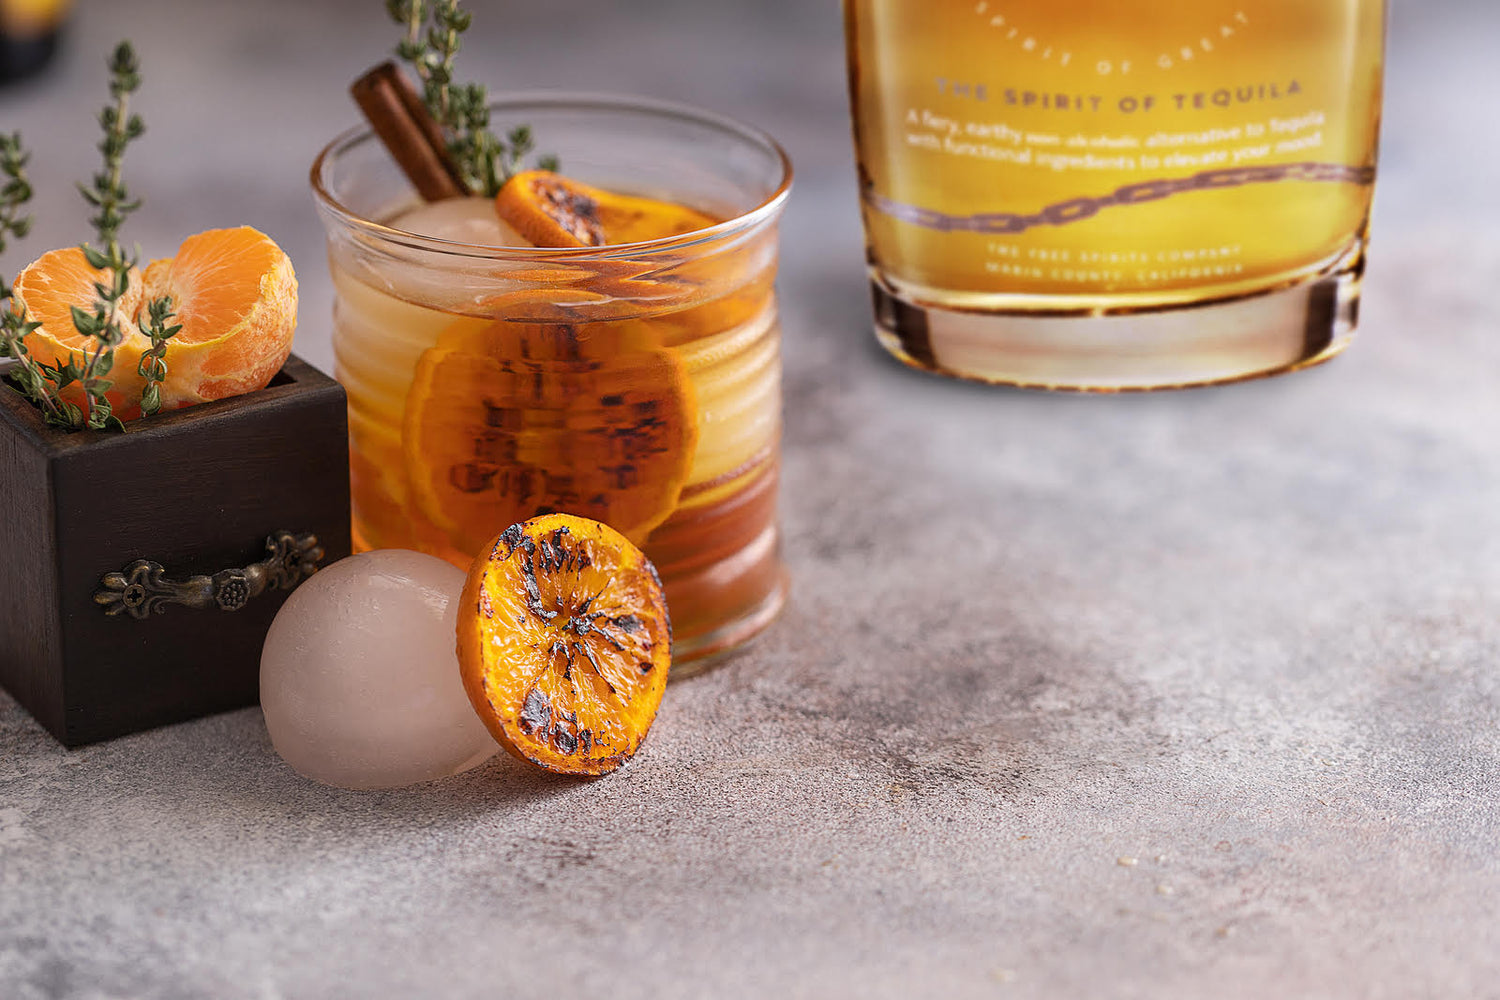 Tangerine Thyme - The Spirit of Tequila